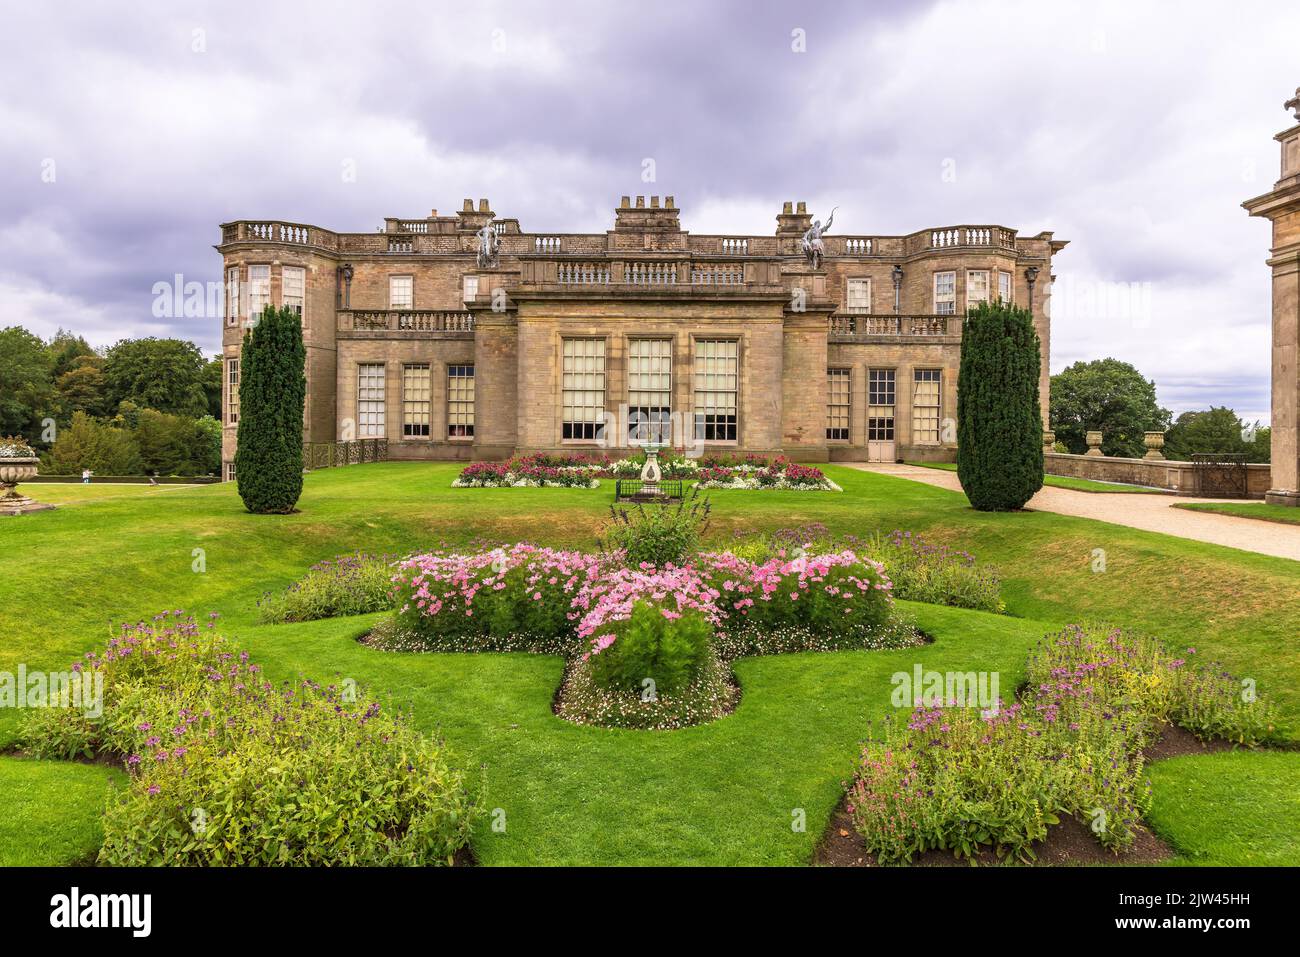 Formal gardens of Lyme Hall historic English Stately Home and public park in Cheshire, England. Stock Photo